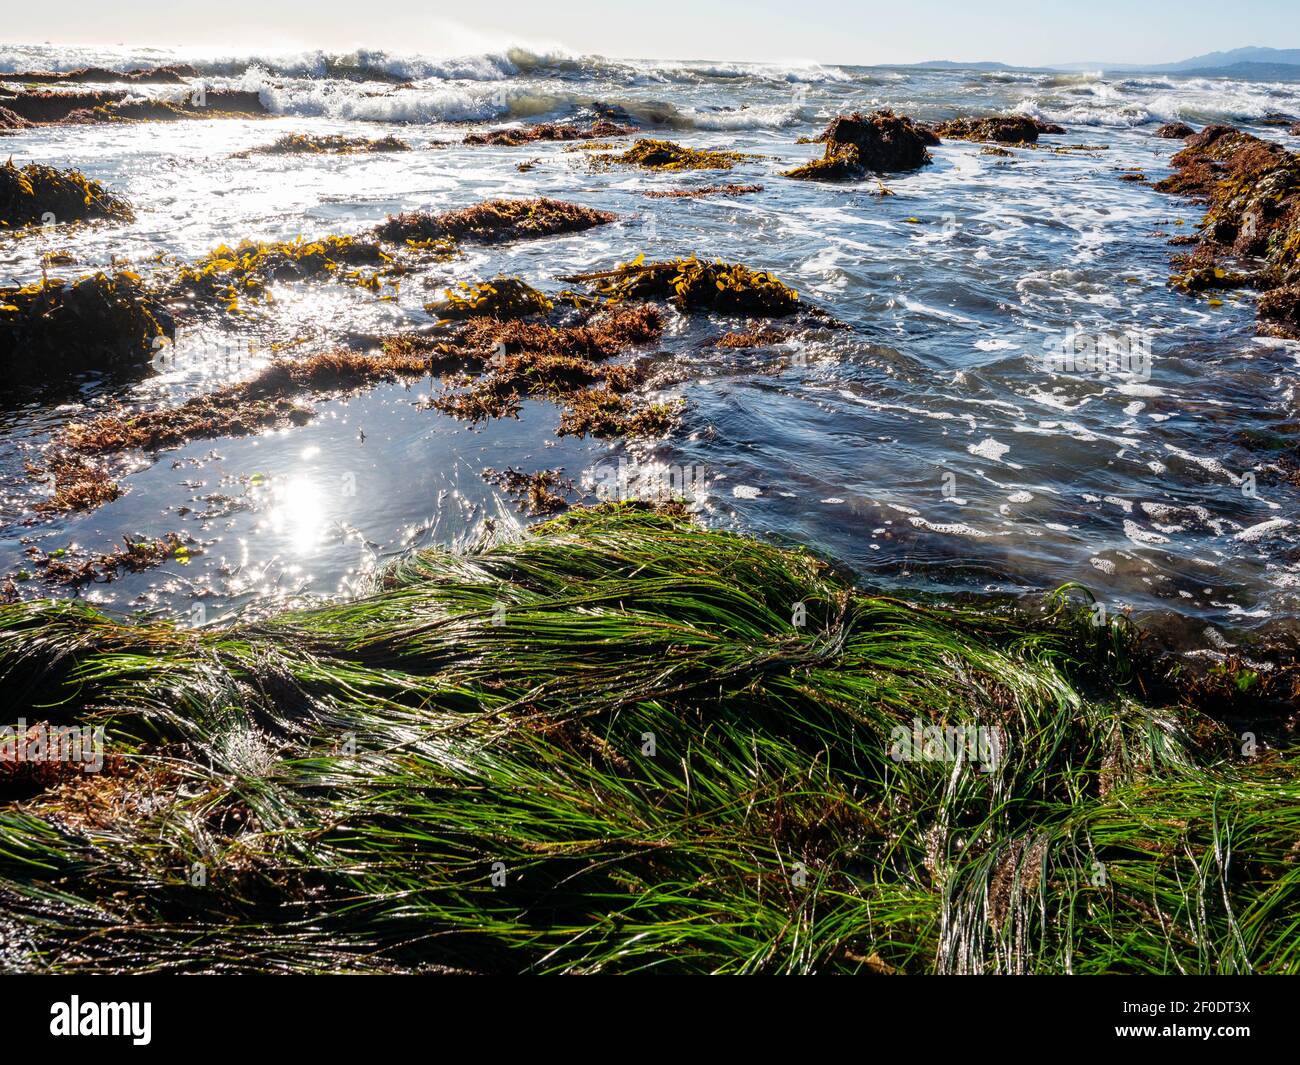 Waves, kelp, and sea grass in the intertidal zone at Tar Pits Beach in Carpinteria California on a sunny day. Stock Photo